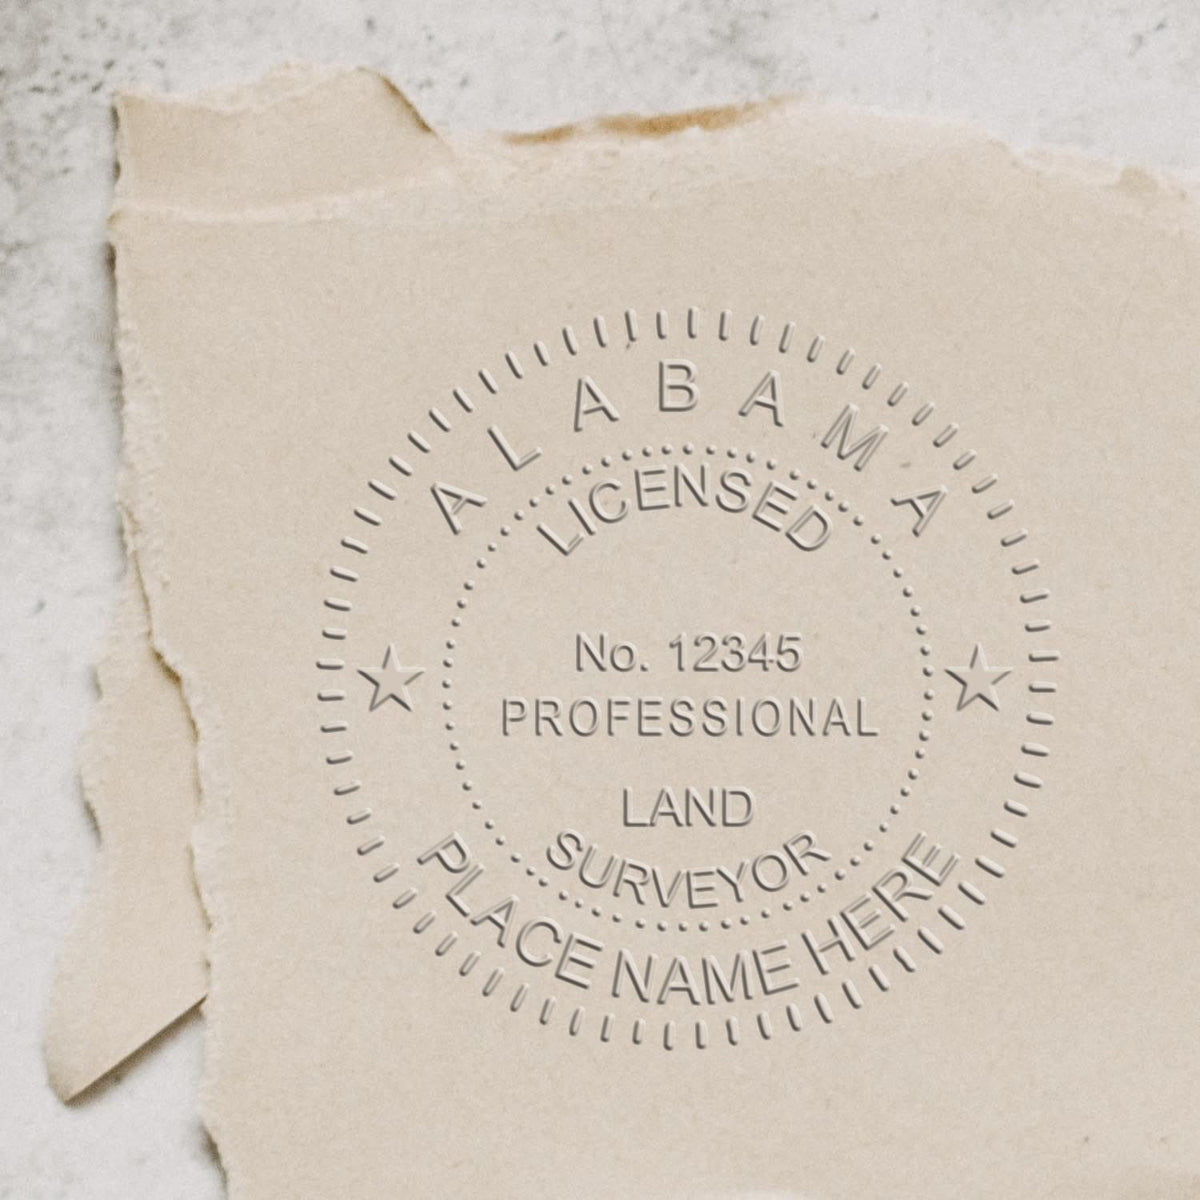 The Gift Alabama Land Surveyor Seal stamp impression comes to life with a crisp, detailed image stamped on paper - showcasing true professional quality.